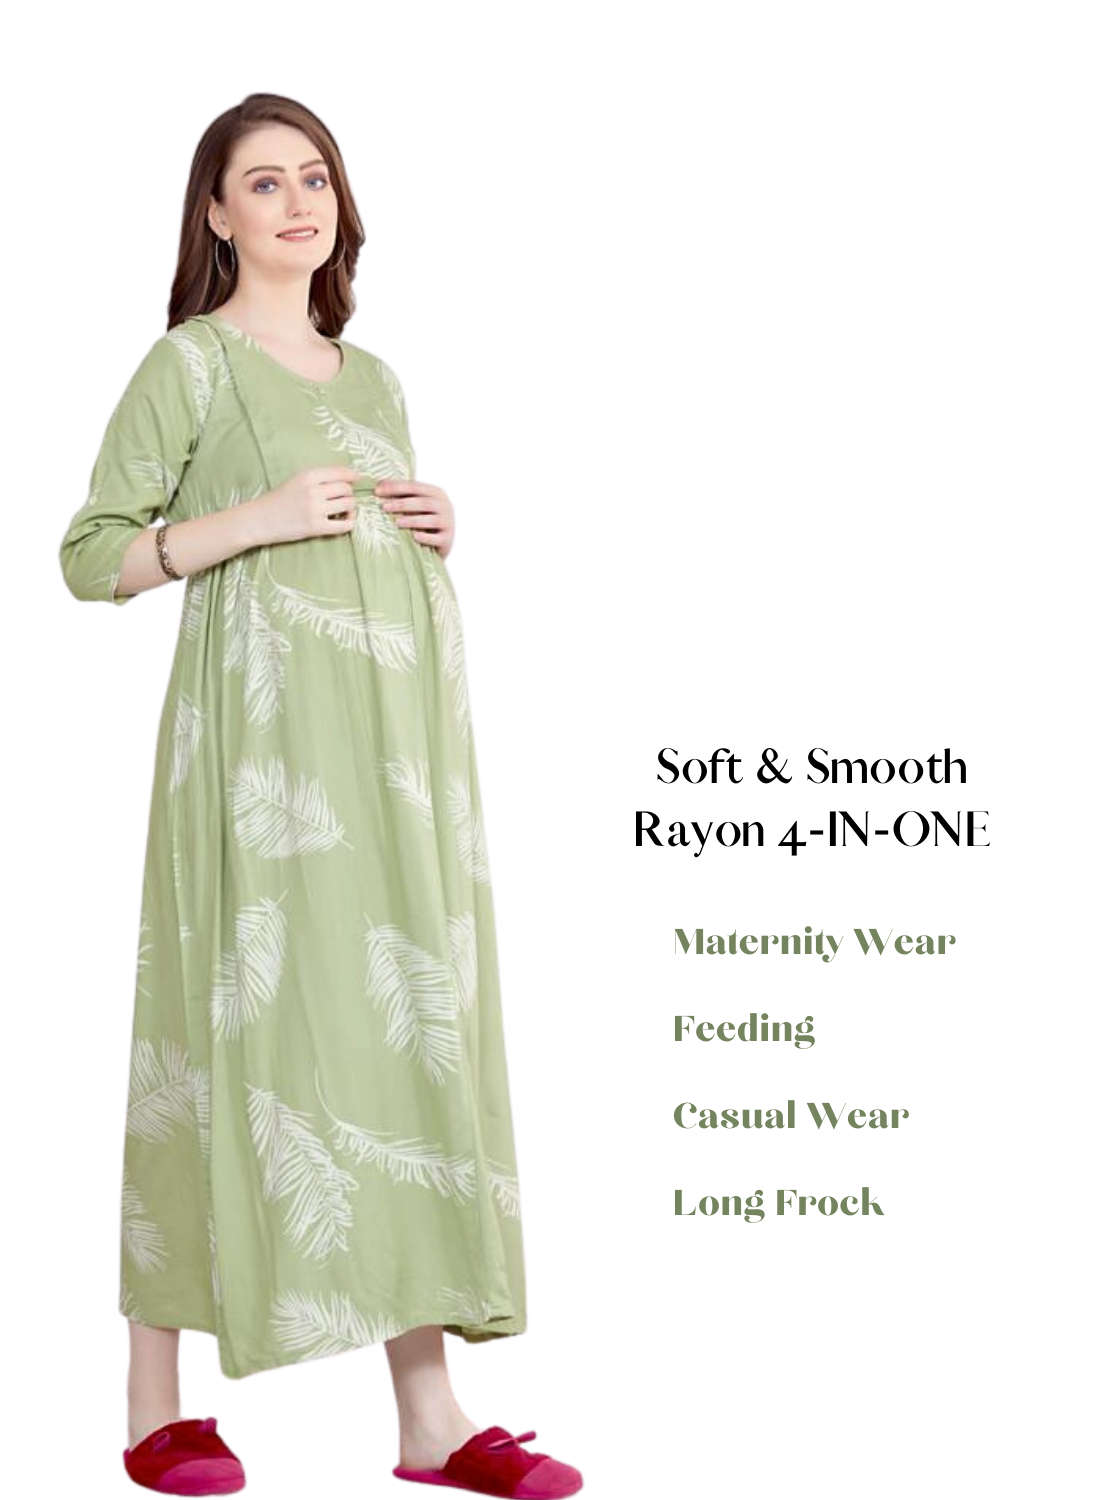 NewArrivalsONLY MINE 4-IN-ONE Mom's Wear - Soft & Smooth Rayon | Maternity | Feeding | Maxi | Long Frock | Casual Wear